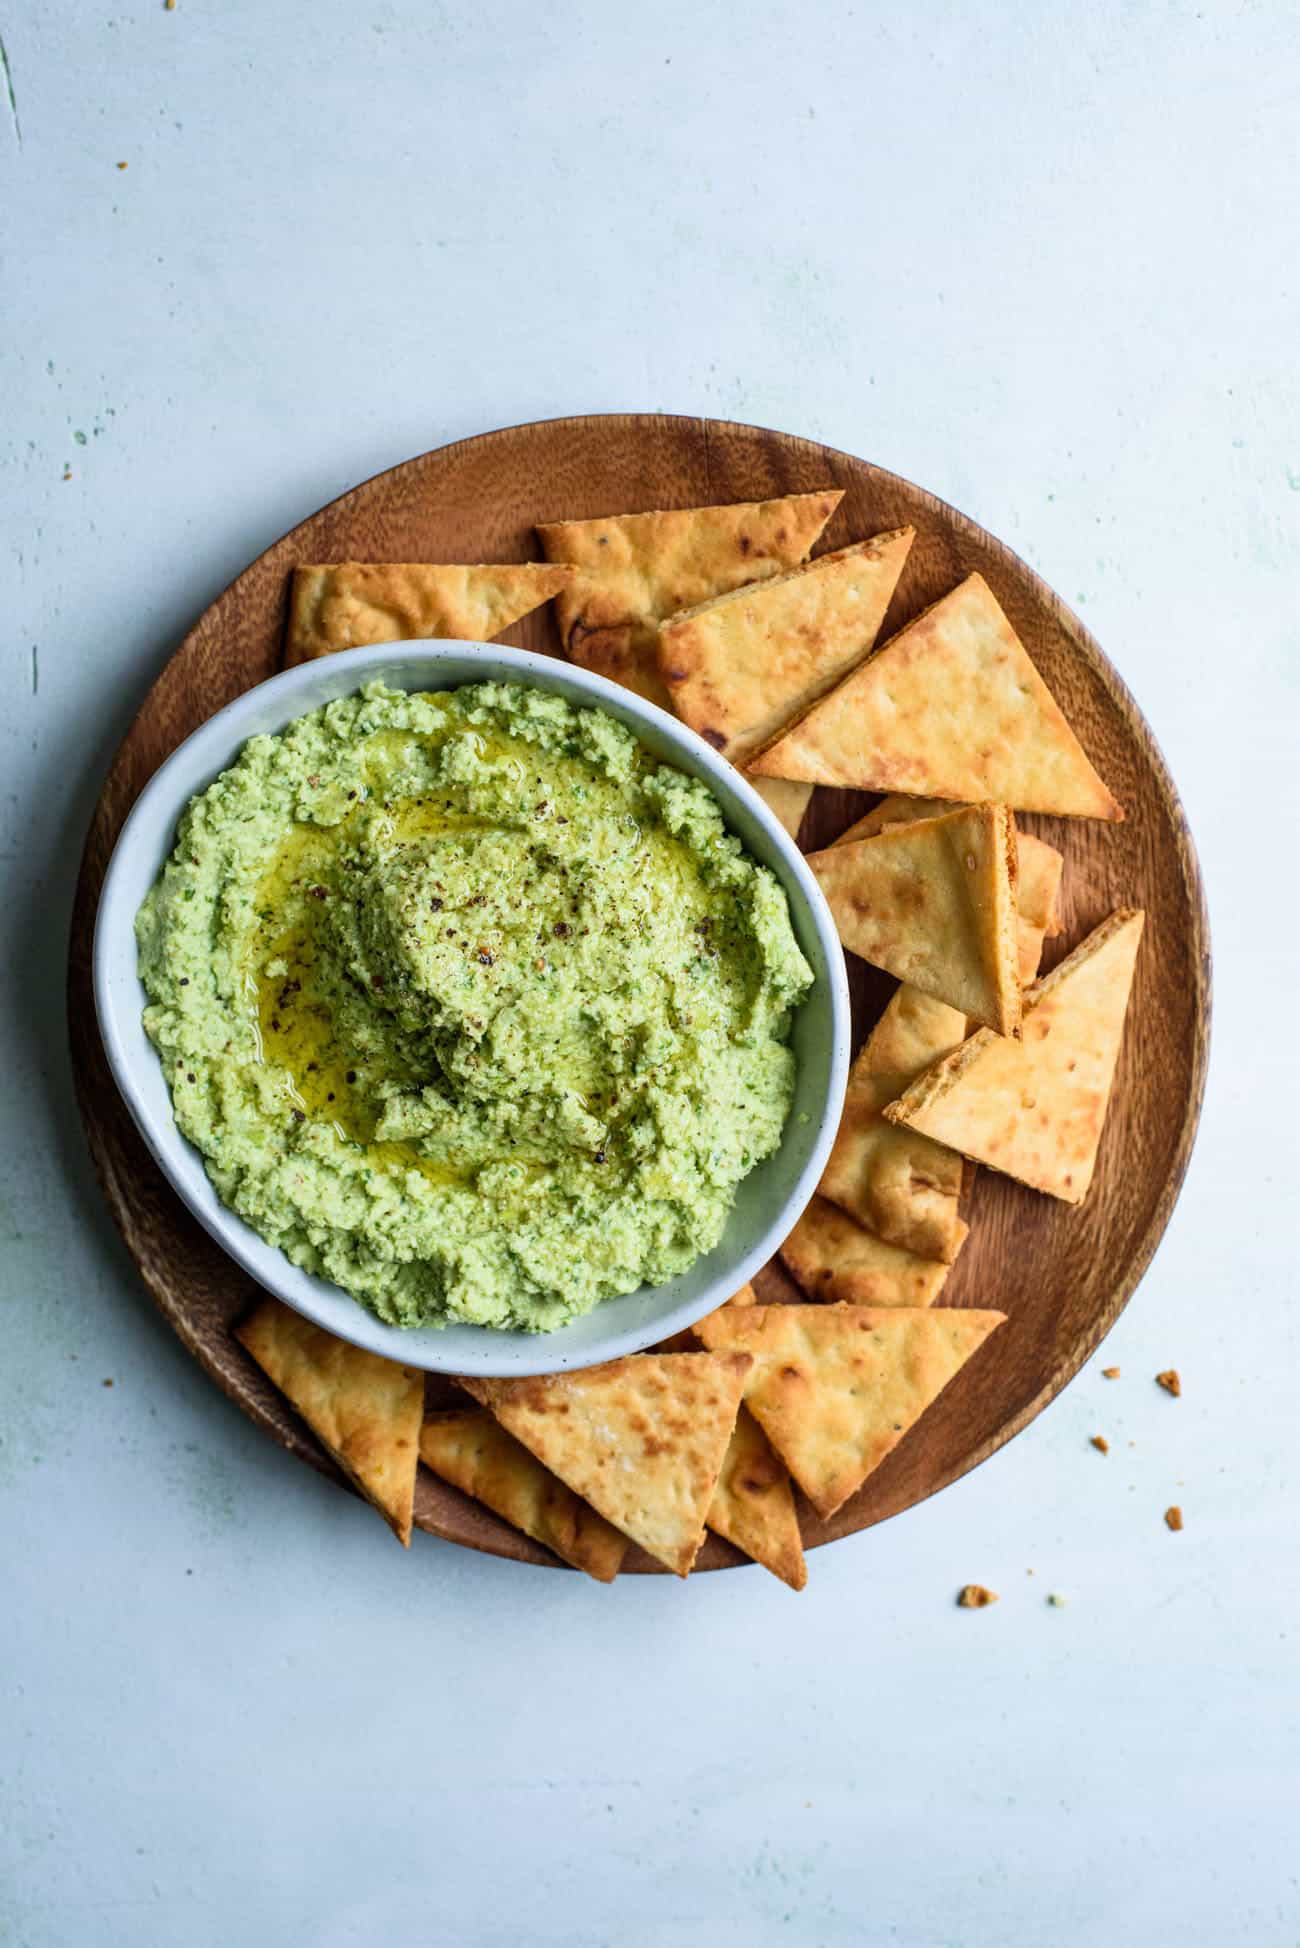 Edamame dip in a bowl on a wooden plate surrounded by pita chips